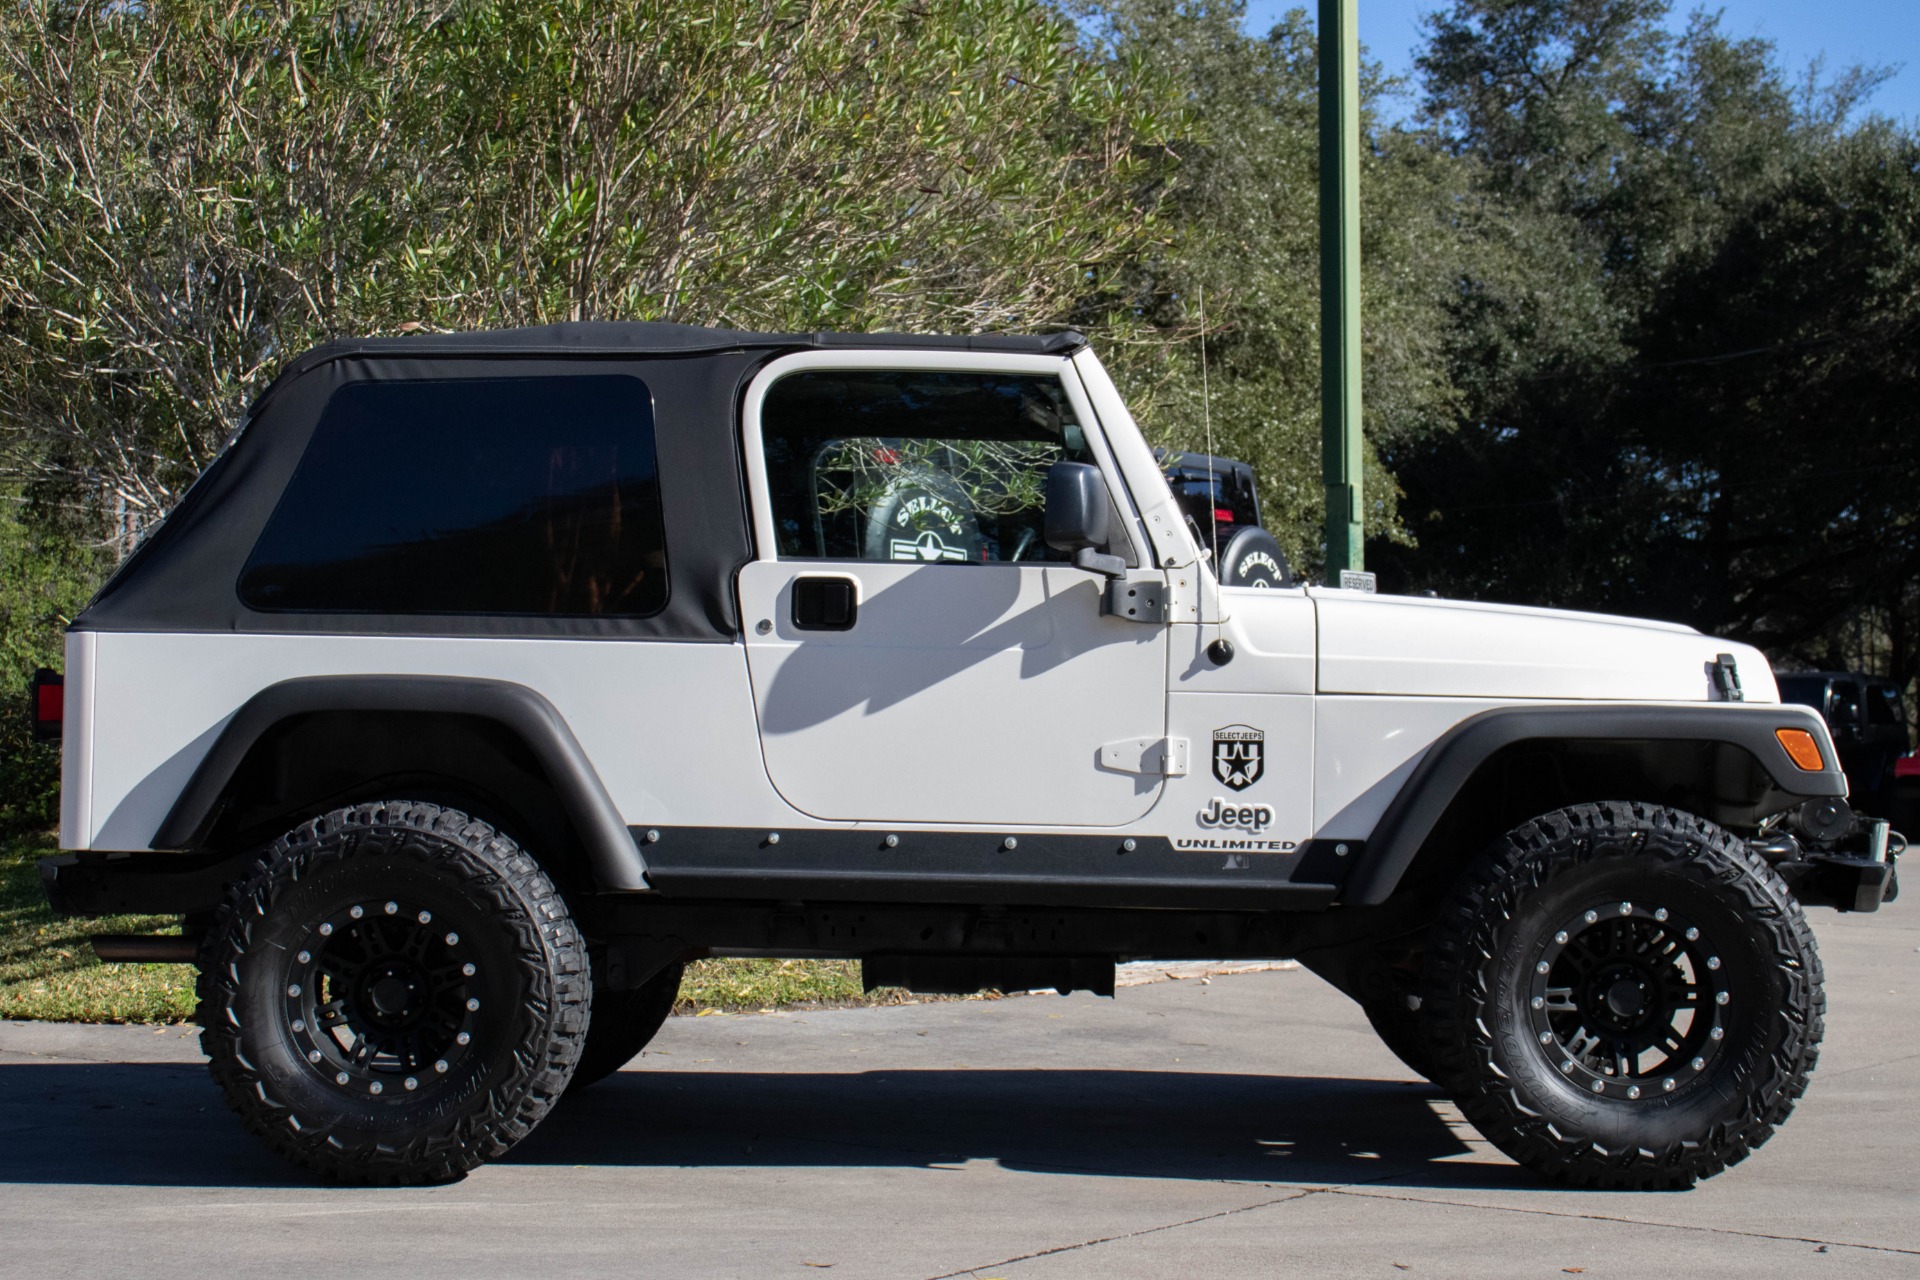 Used 2005 Jeep Wrangler Unlimited For Sale ($14,995) | Select Jeeps Inc.  Stock #332274